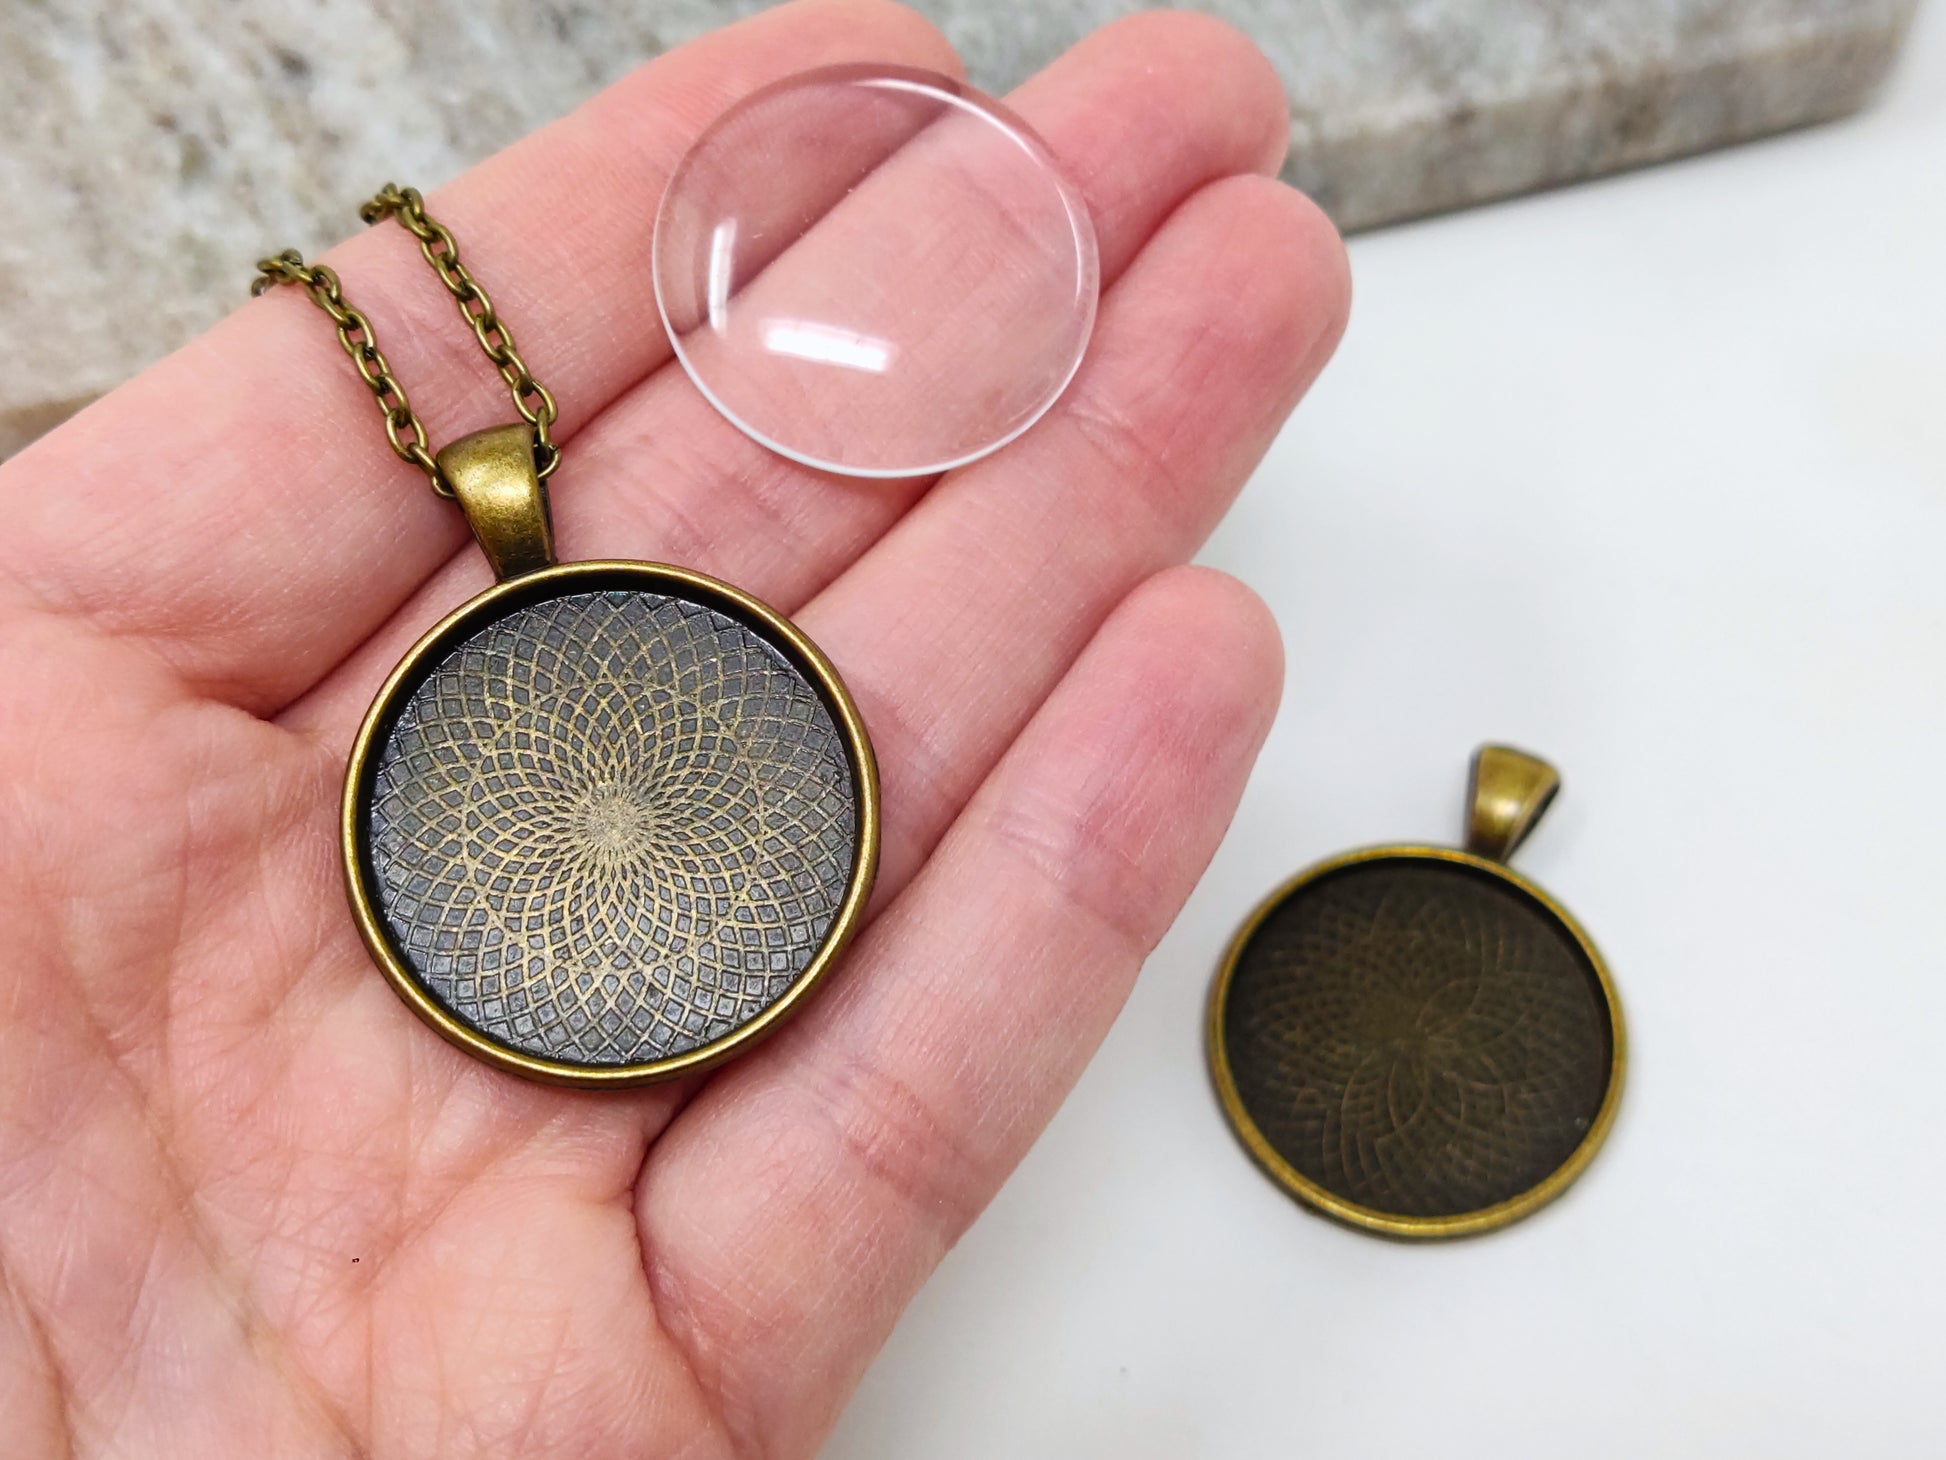 Bezel settings and you can match them with glass cabochons, gemstone cabochons, our handmade image cabochons, resin and more to create beautiful picture pendant necklace or custom jewelry.